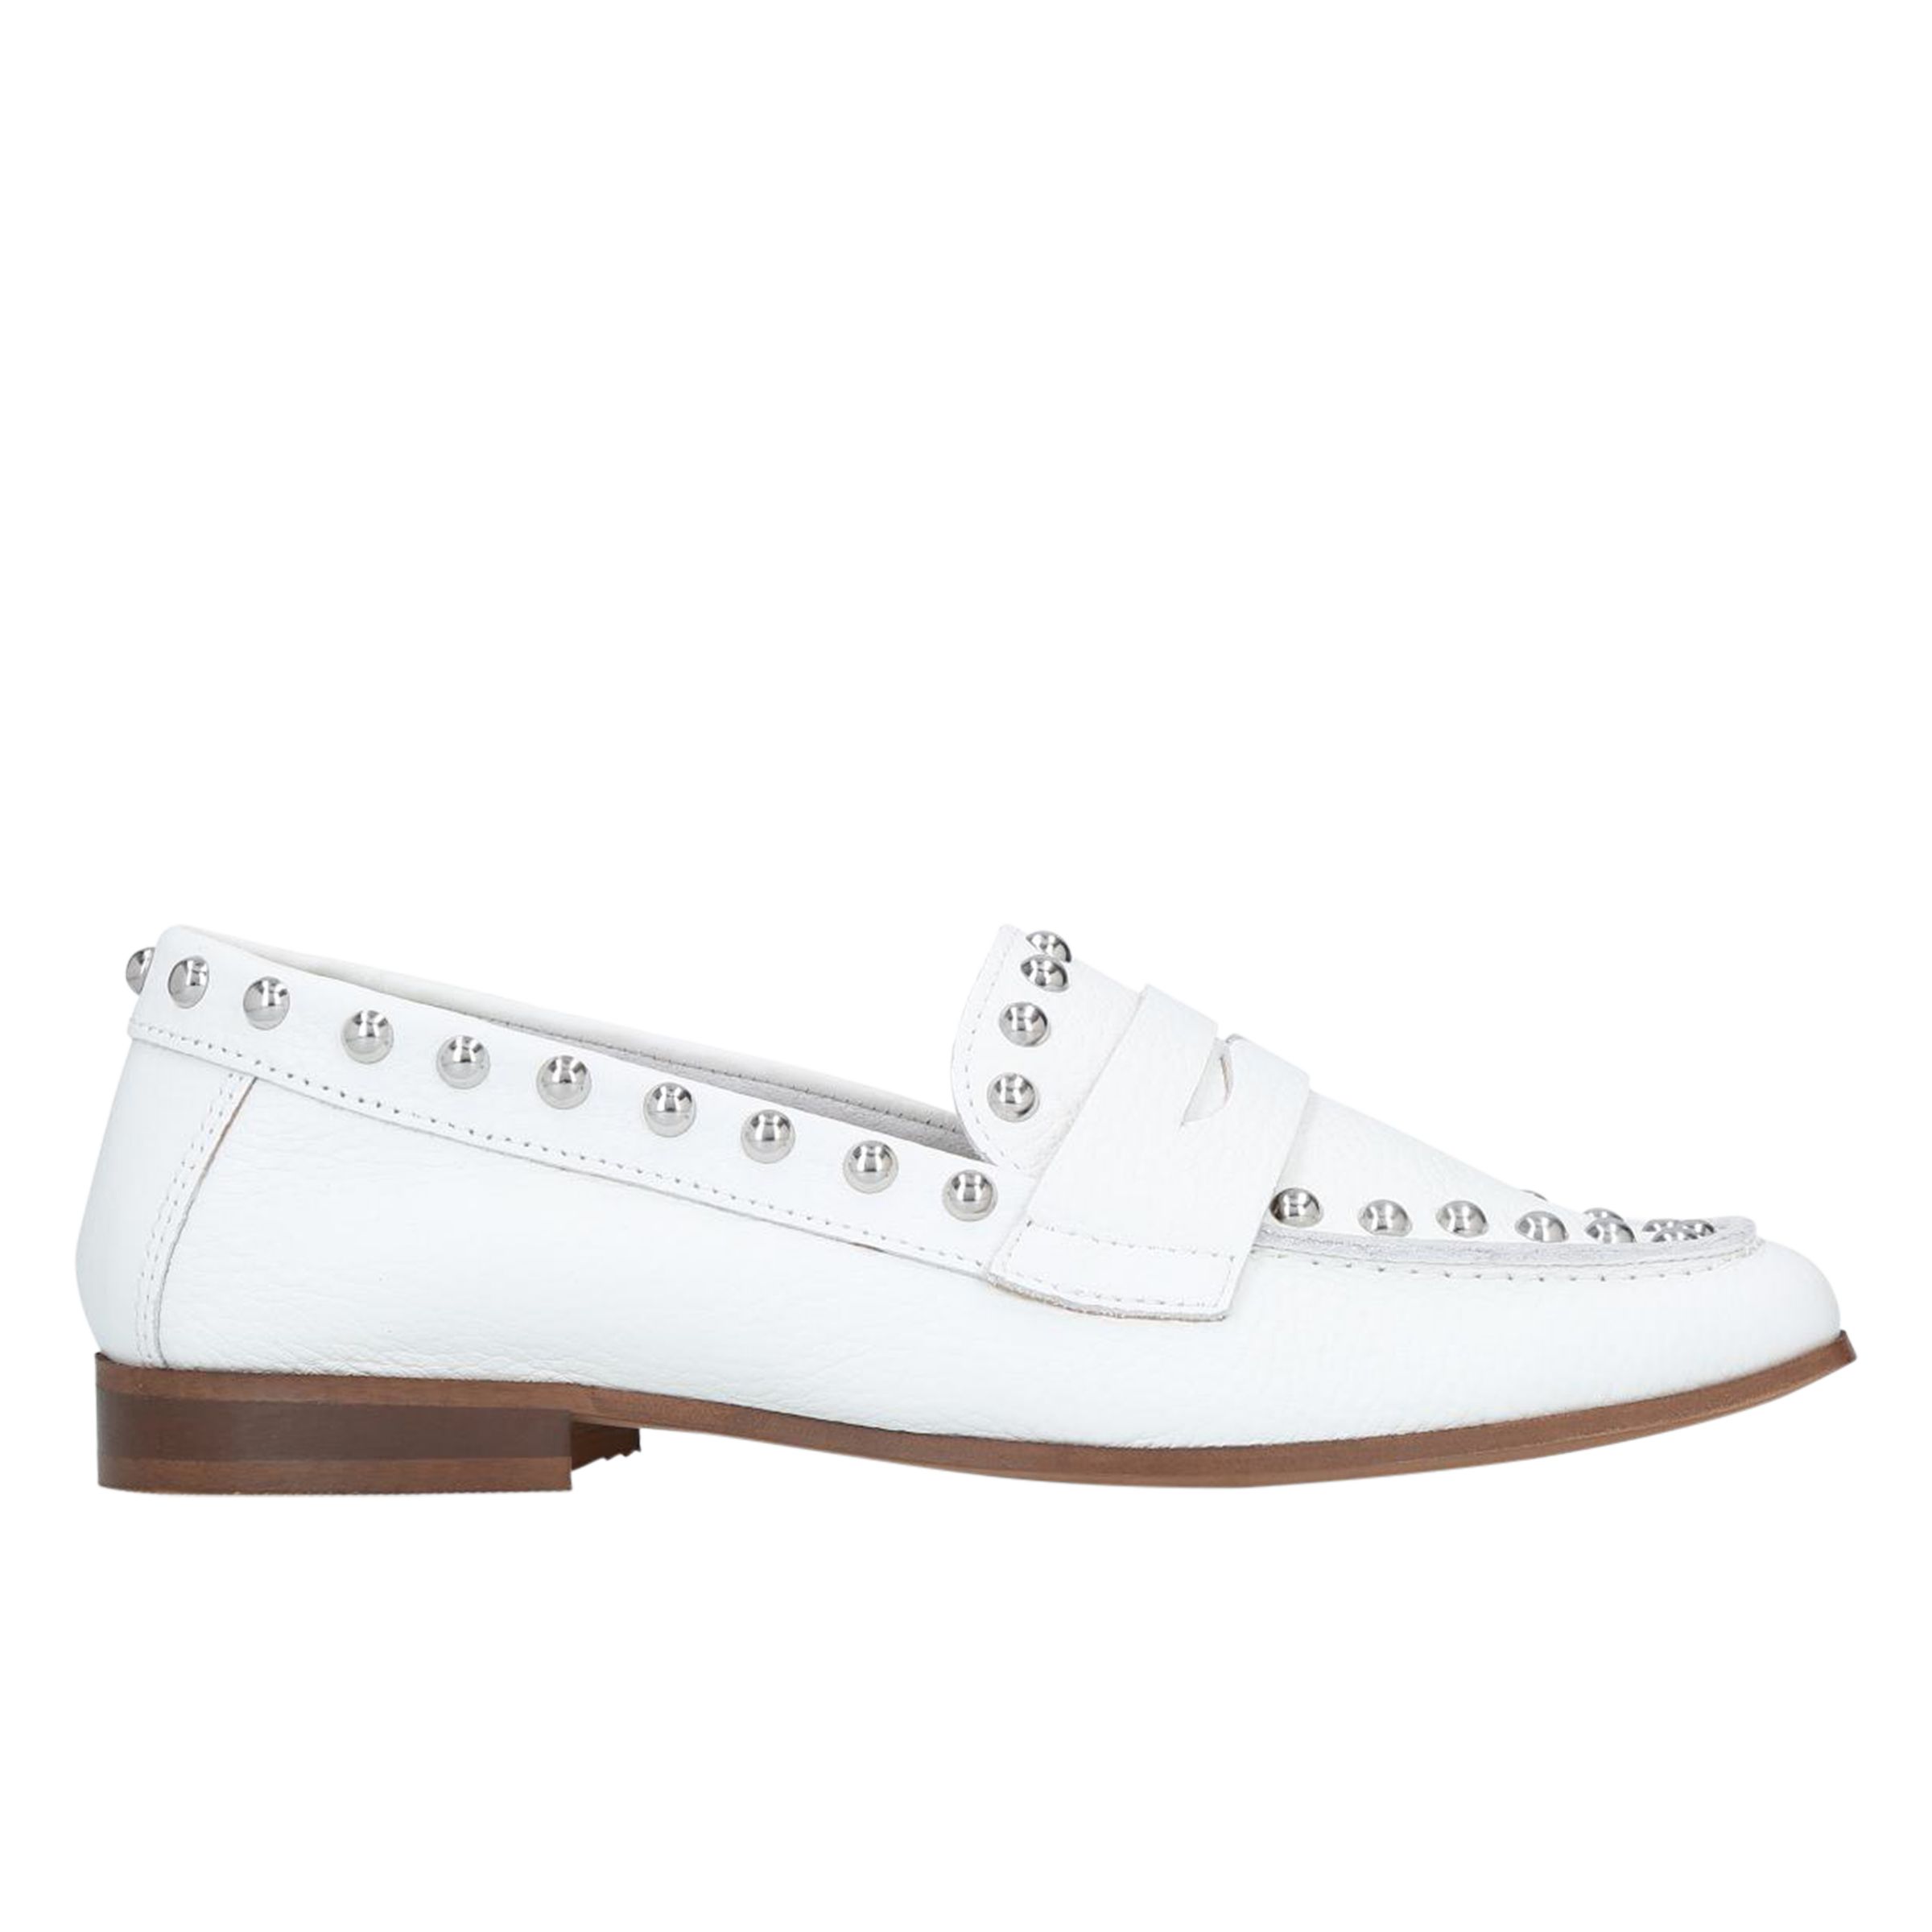 Carvela Lowry Stud Embellished Loafers, White Bright Leather